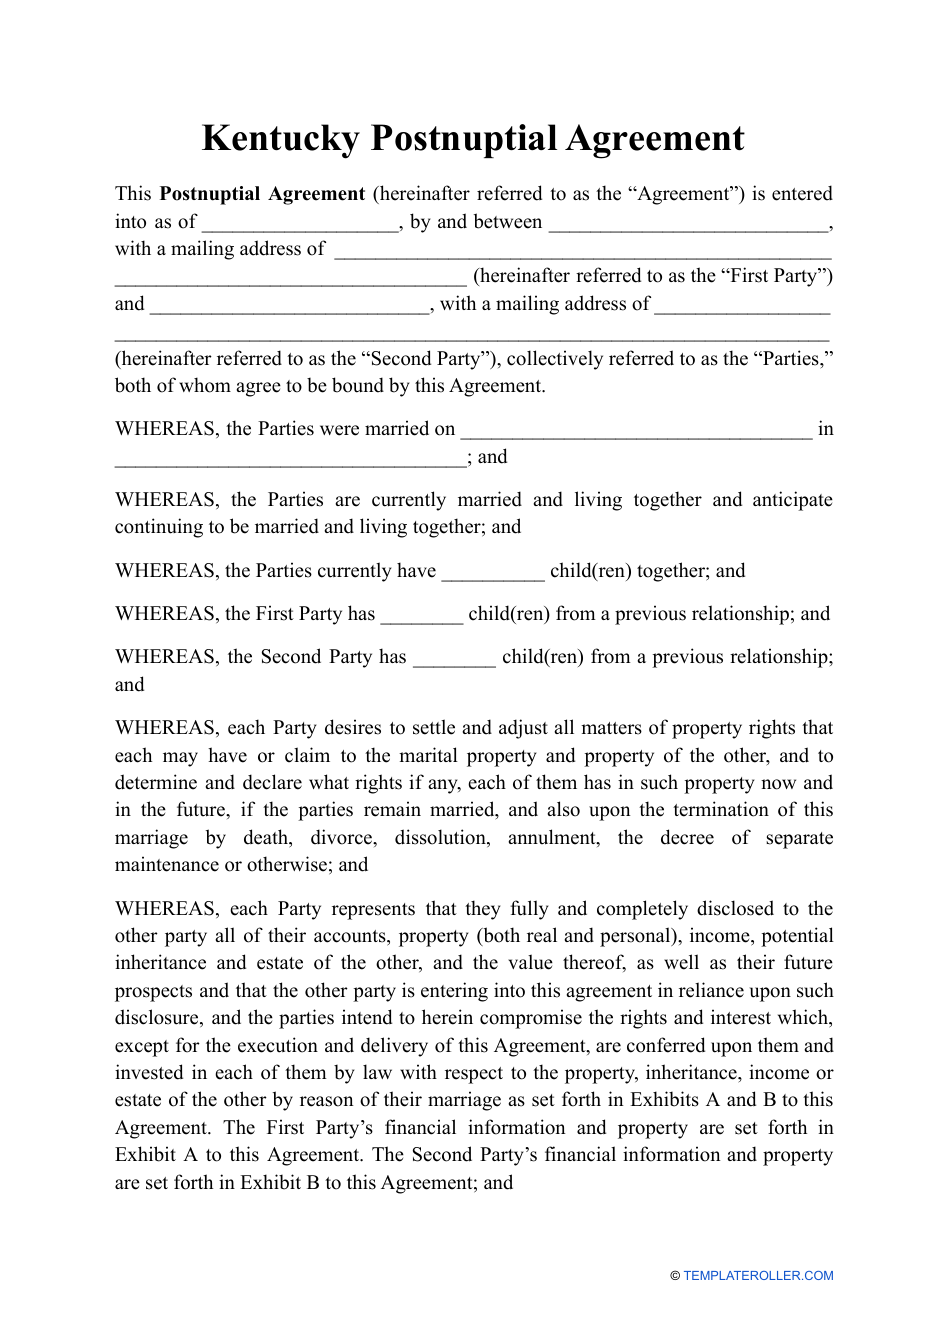 Postnuptial Agreement Template - Kentucky, Page 1